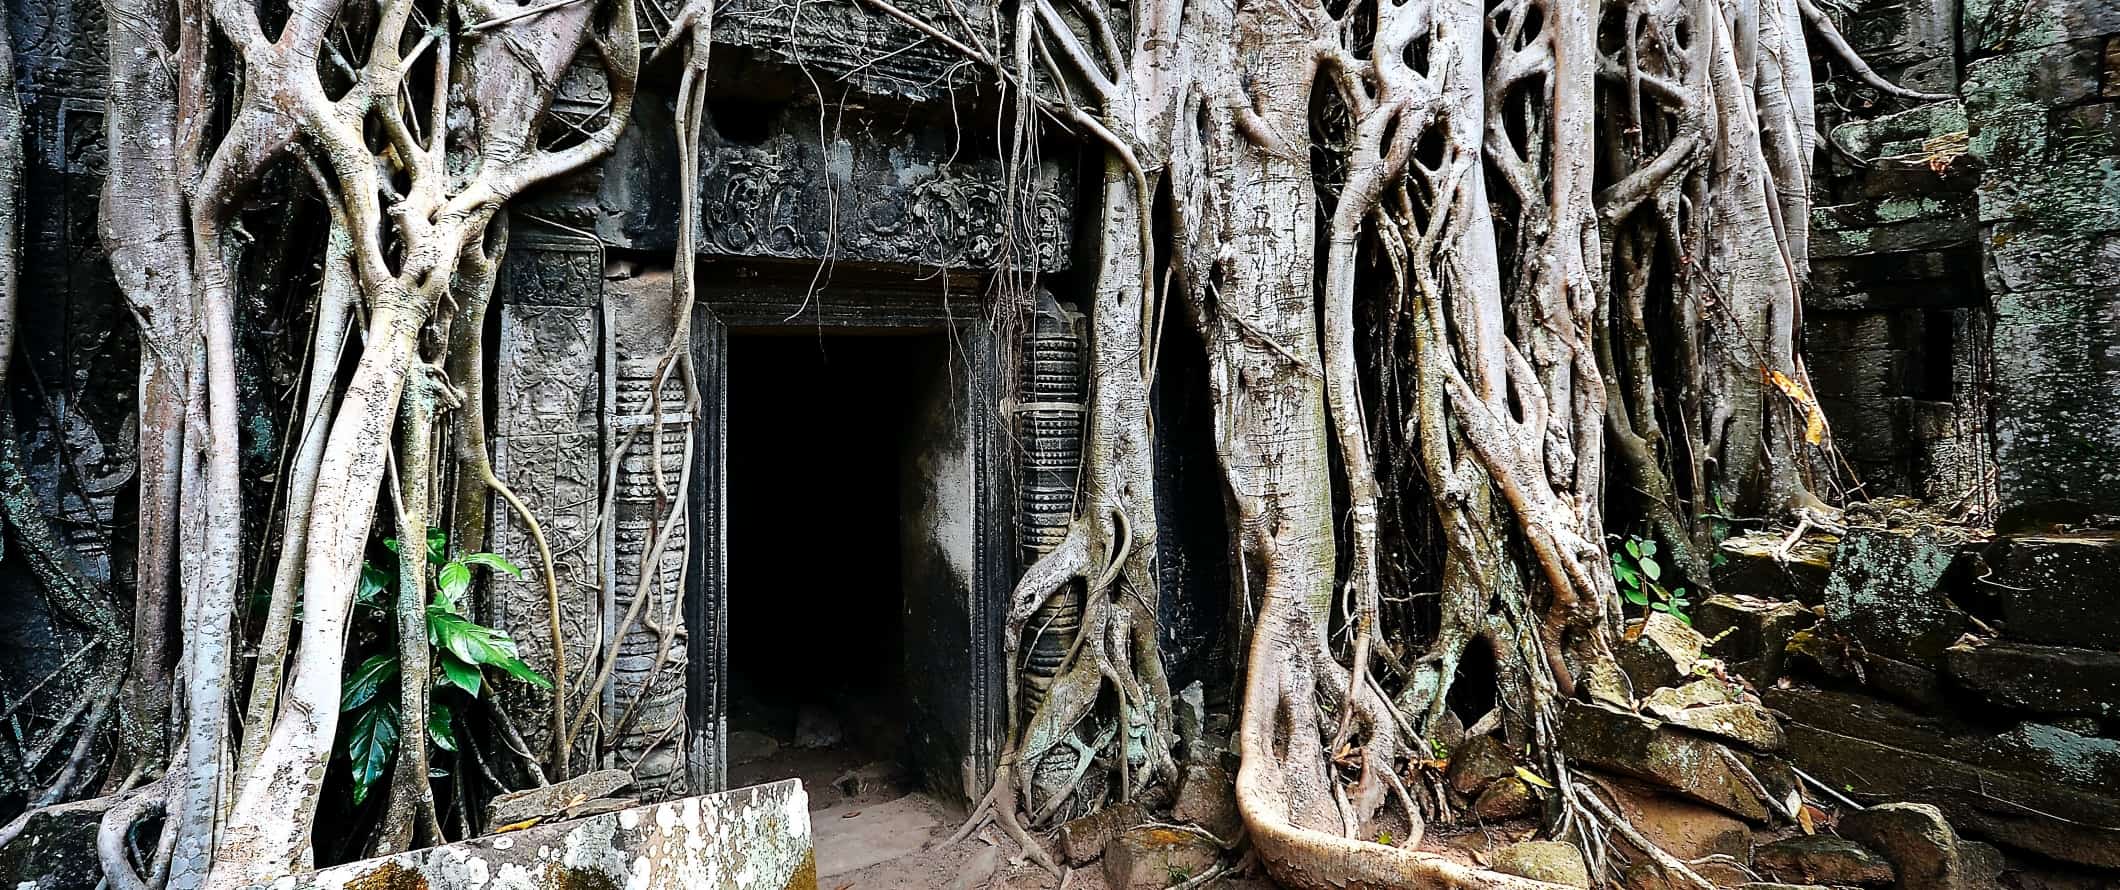 Overgrown door with large tree roots surrounding it in the temple complex of Ta Prohm at Angkor Wat in Cambodia